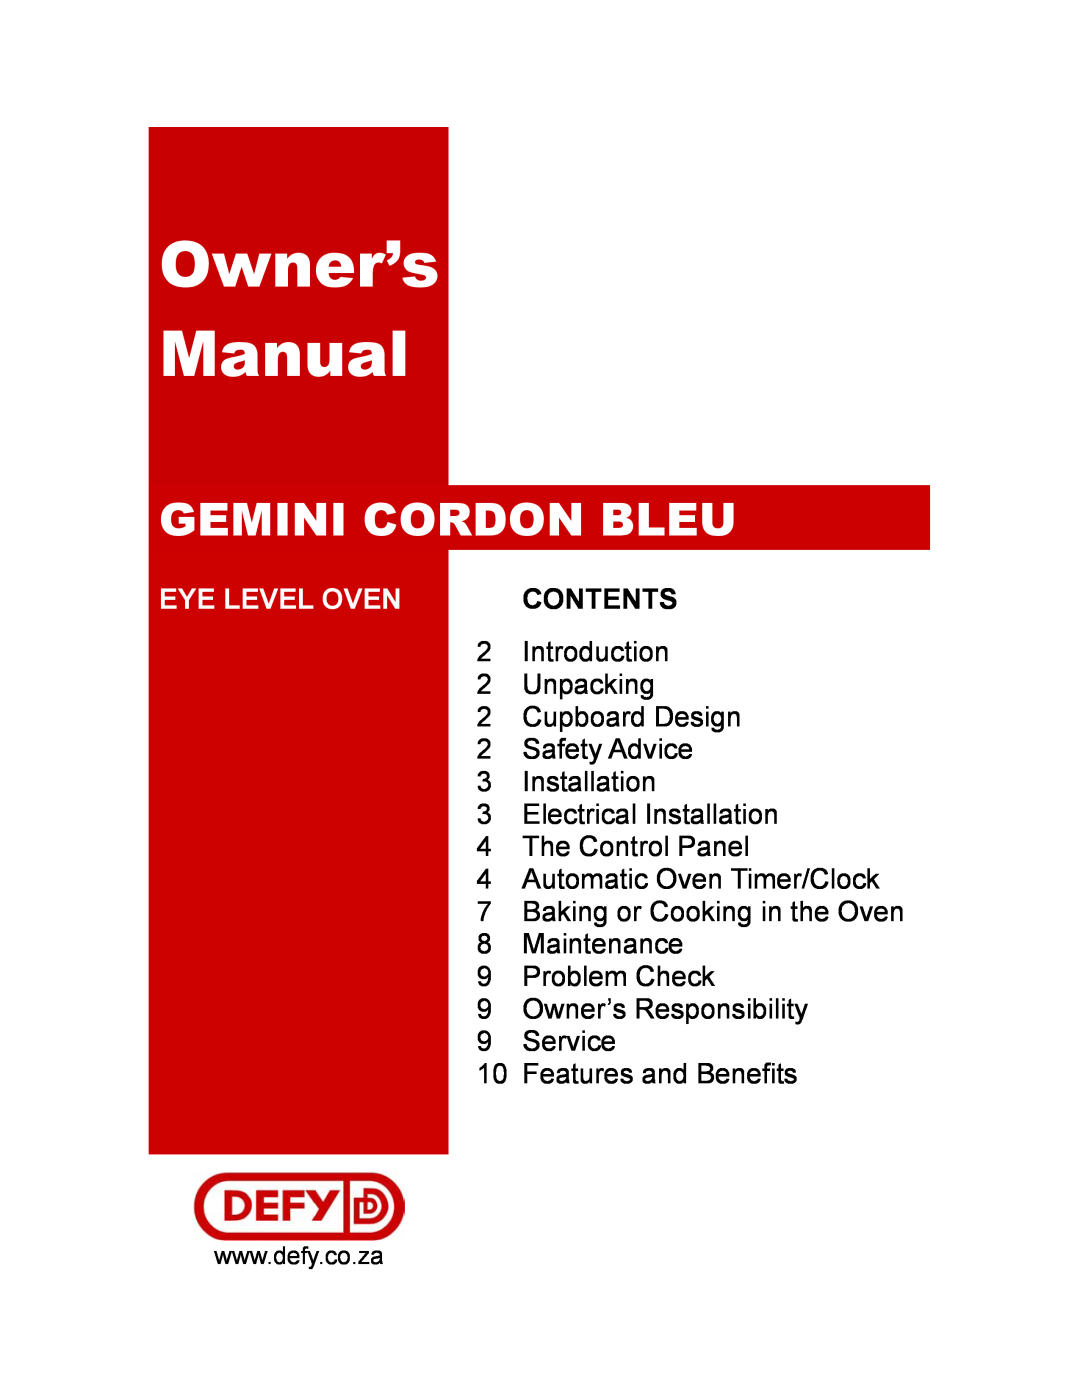 Defy Appliances 061 800 owner manual Eye Level Oven, Contents, Gemini Cordon Bleu, Features and Benefits 